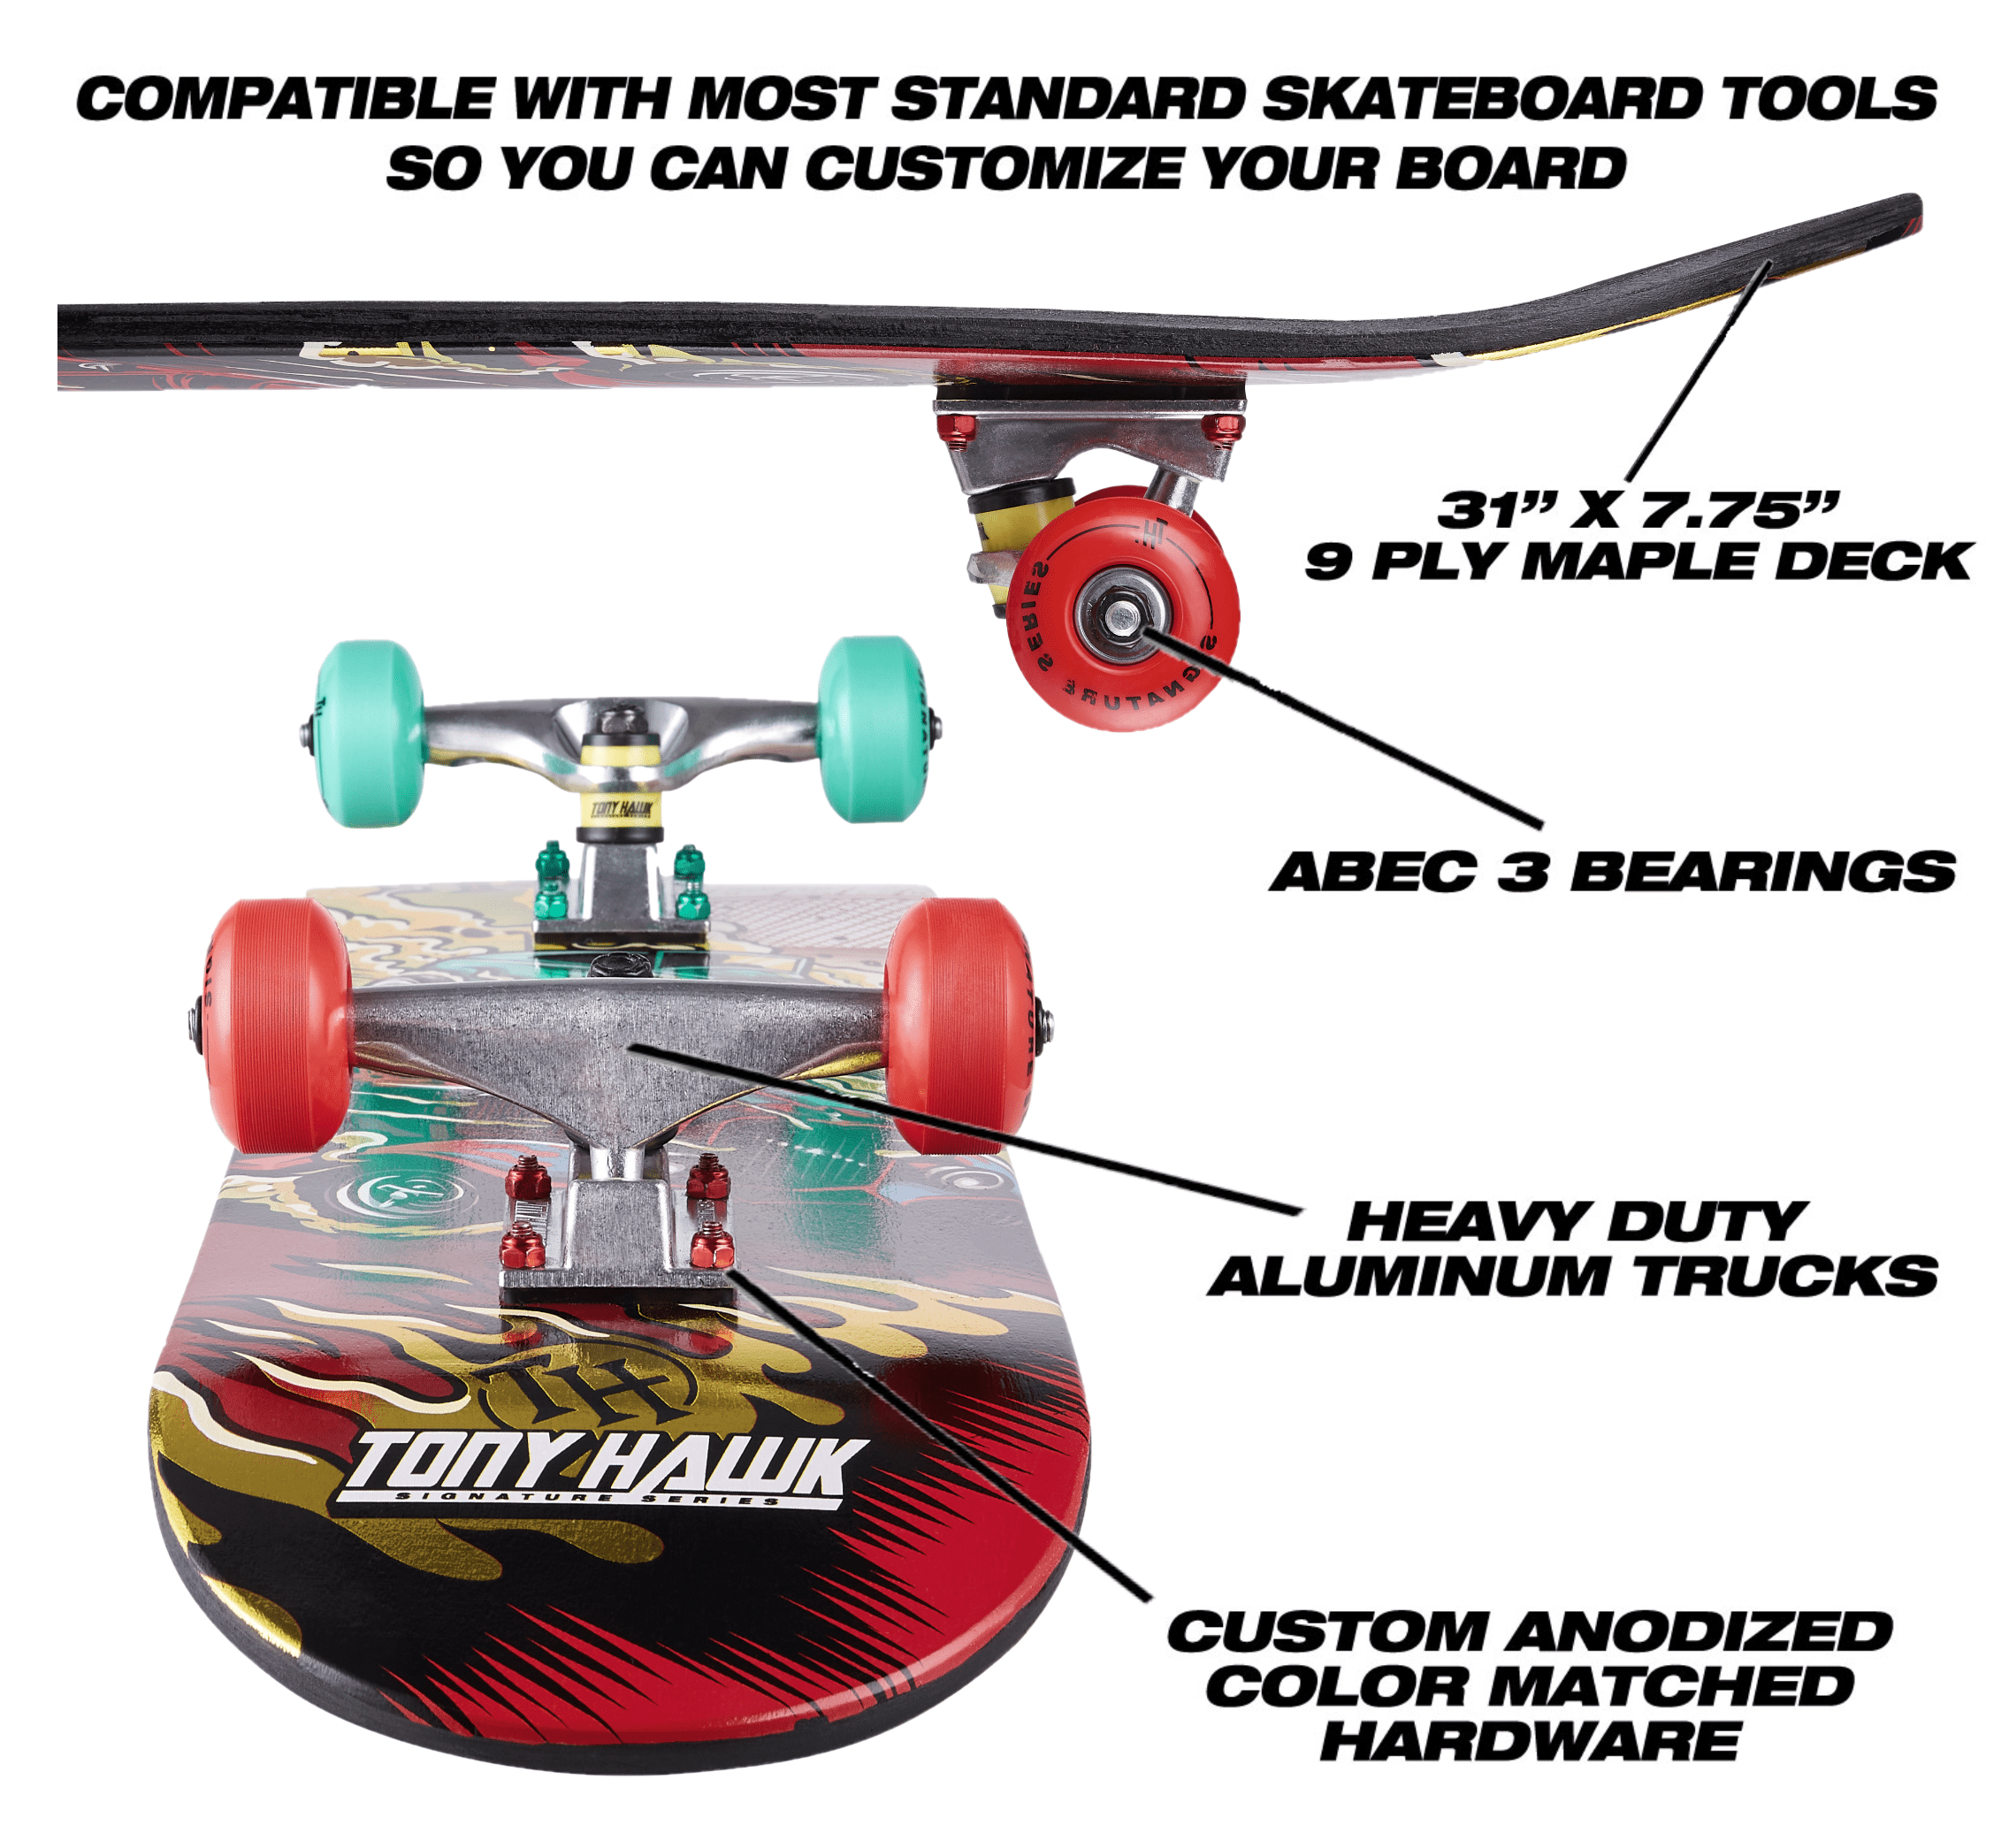 Tony 31" Popsicle Complete Skateboard with Pro Trucks, Racing Car, Kids Ages 5+ - Walmart.com